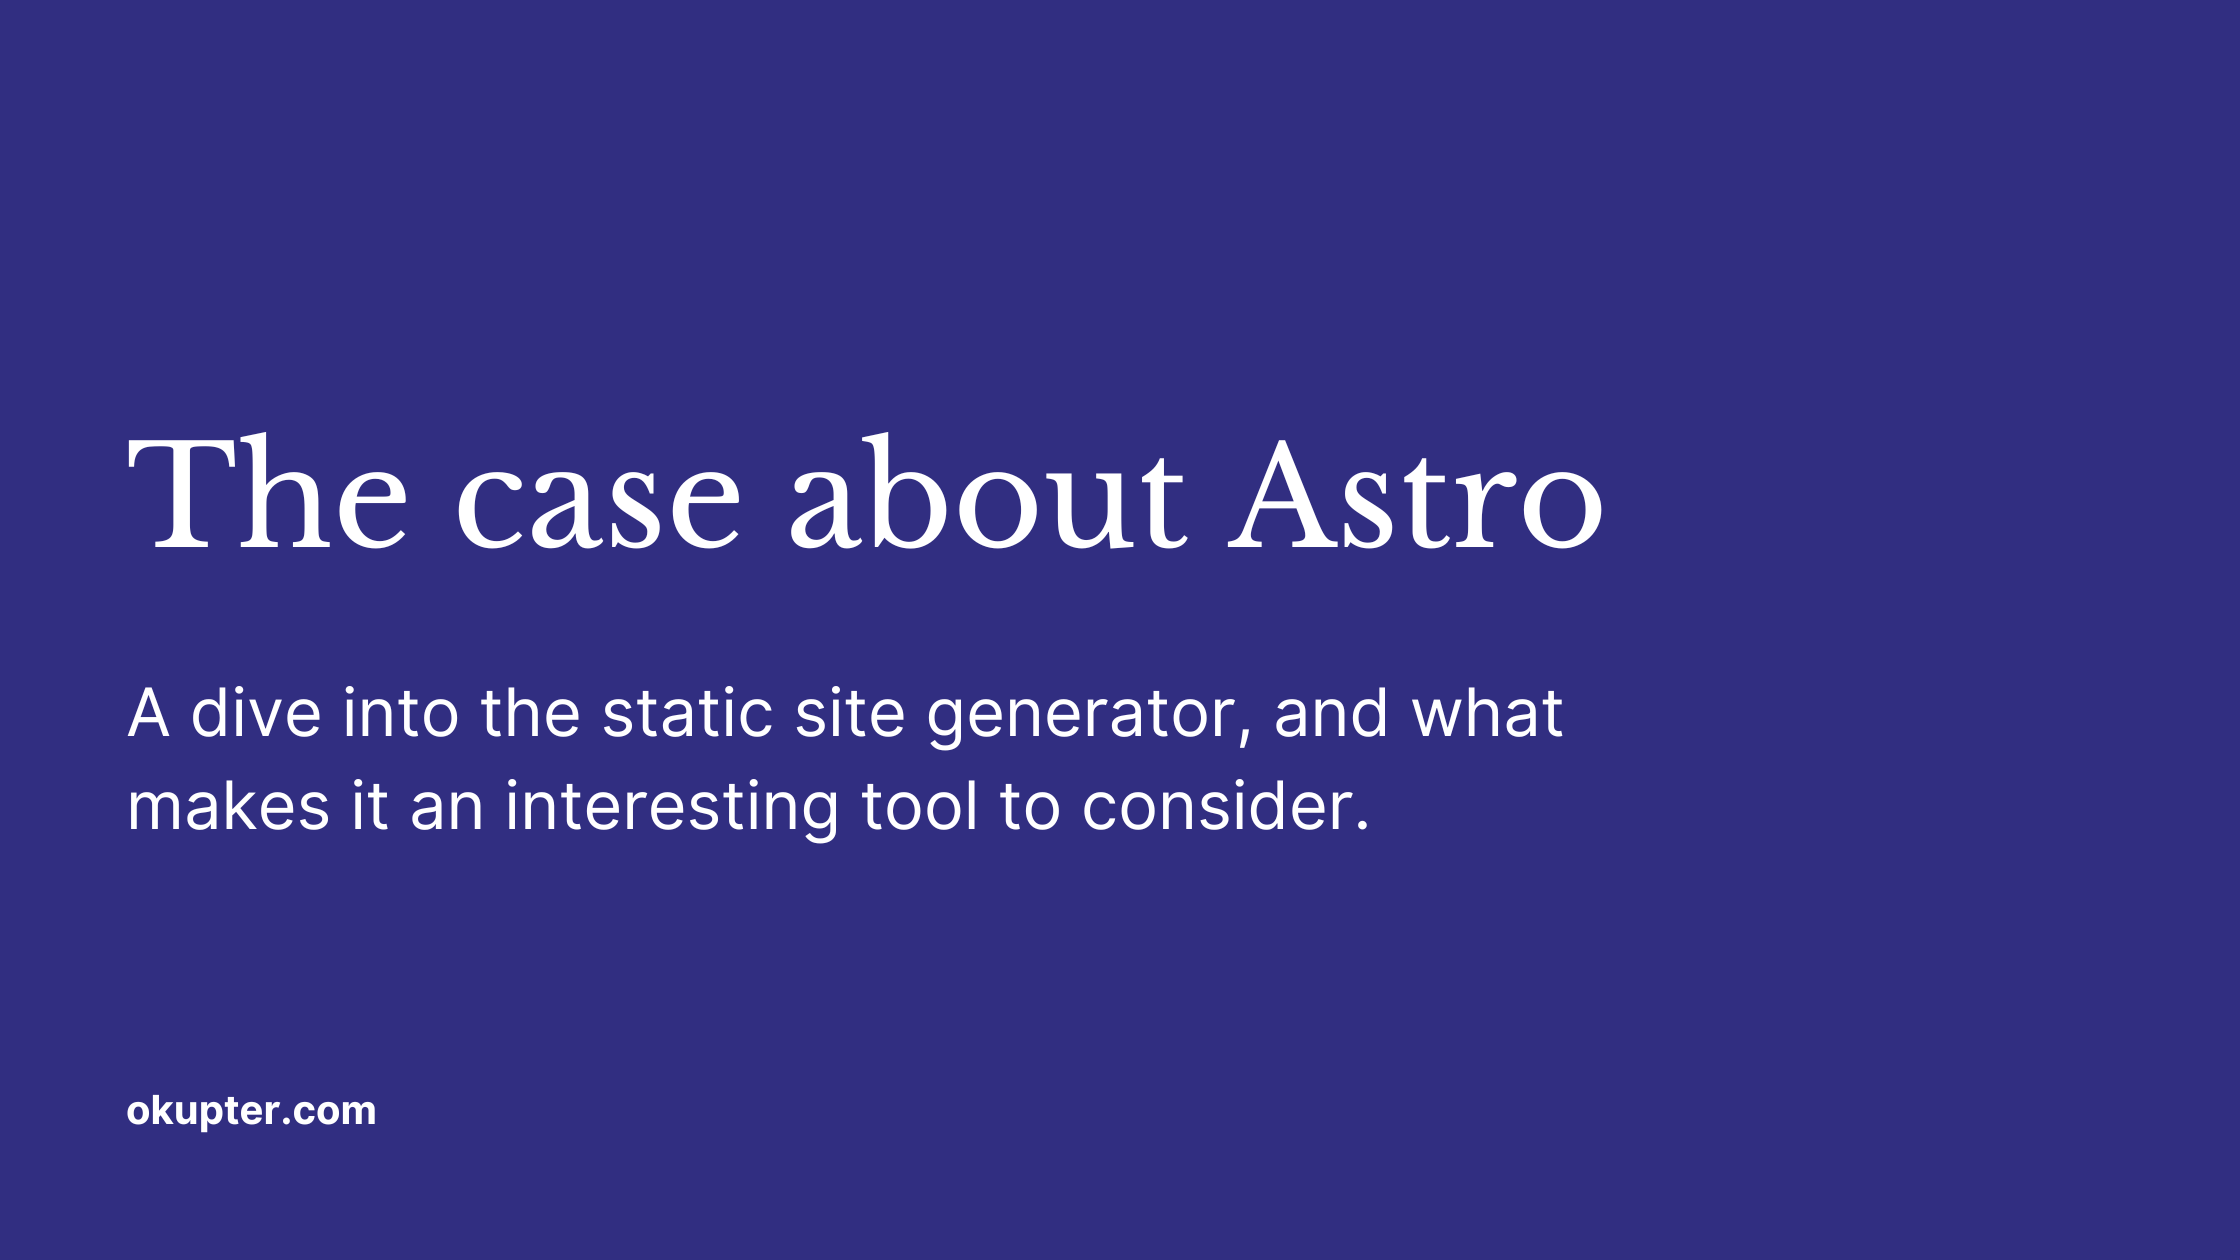 The case about Astro